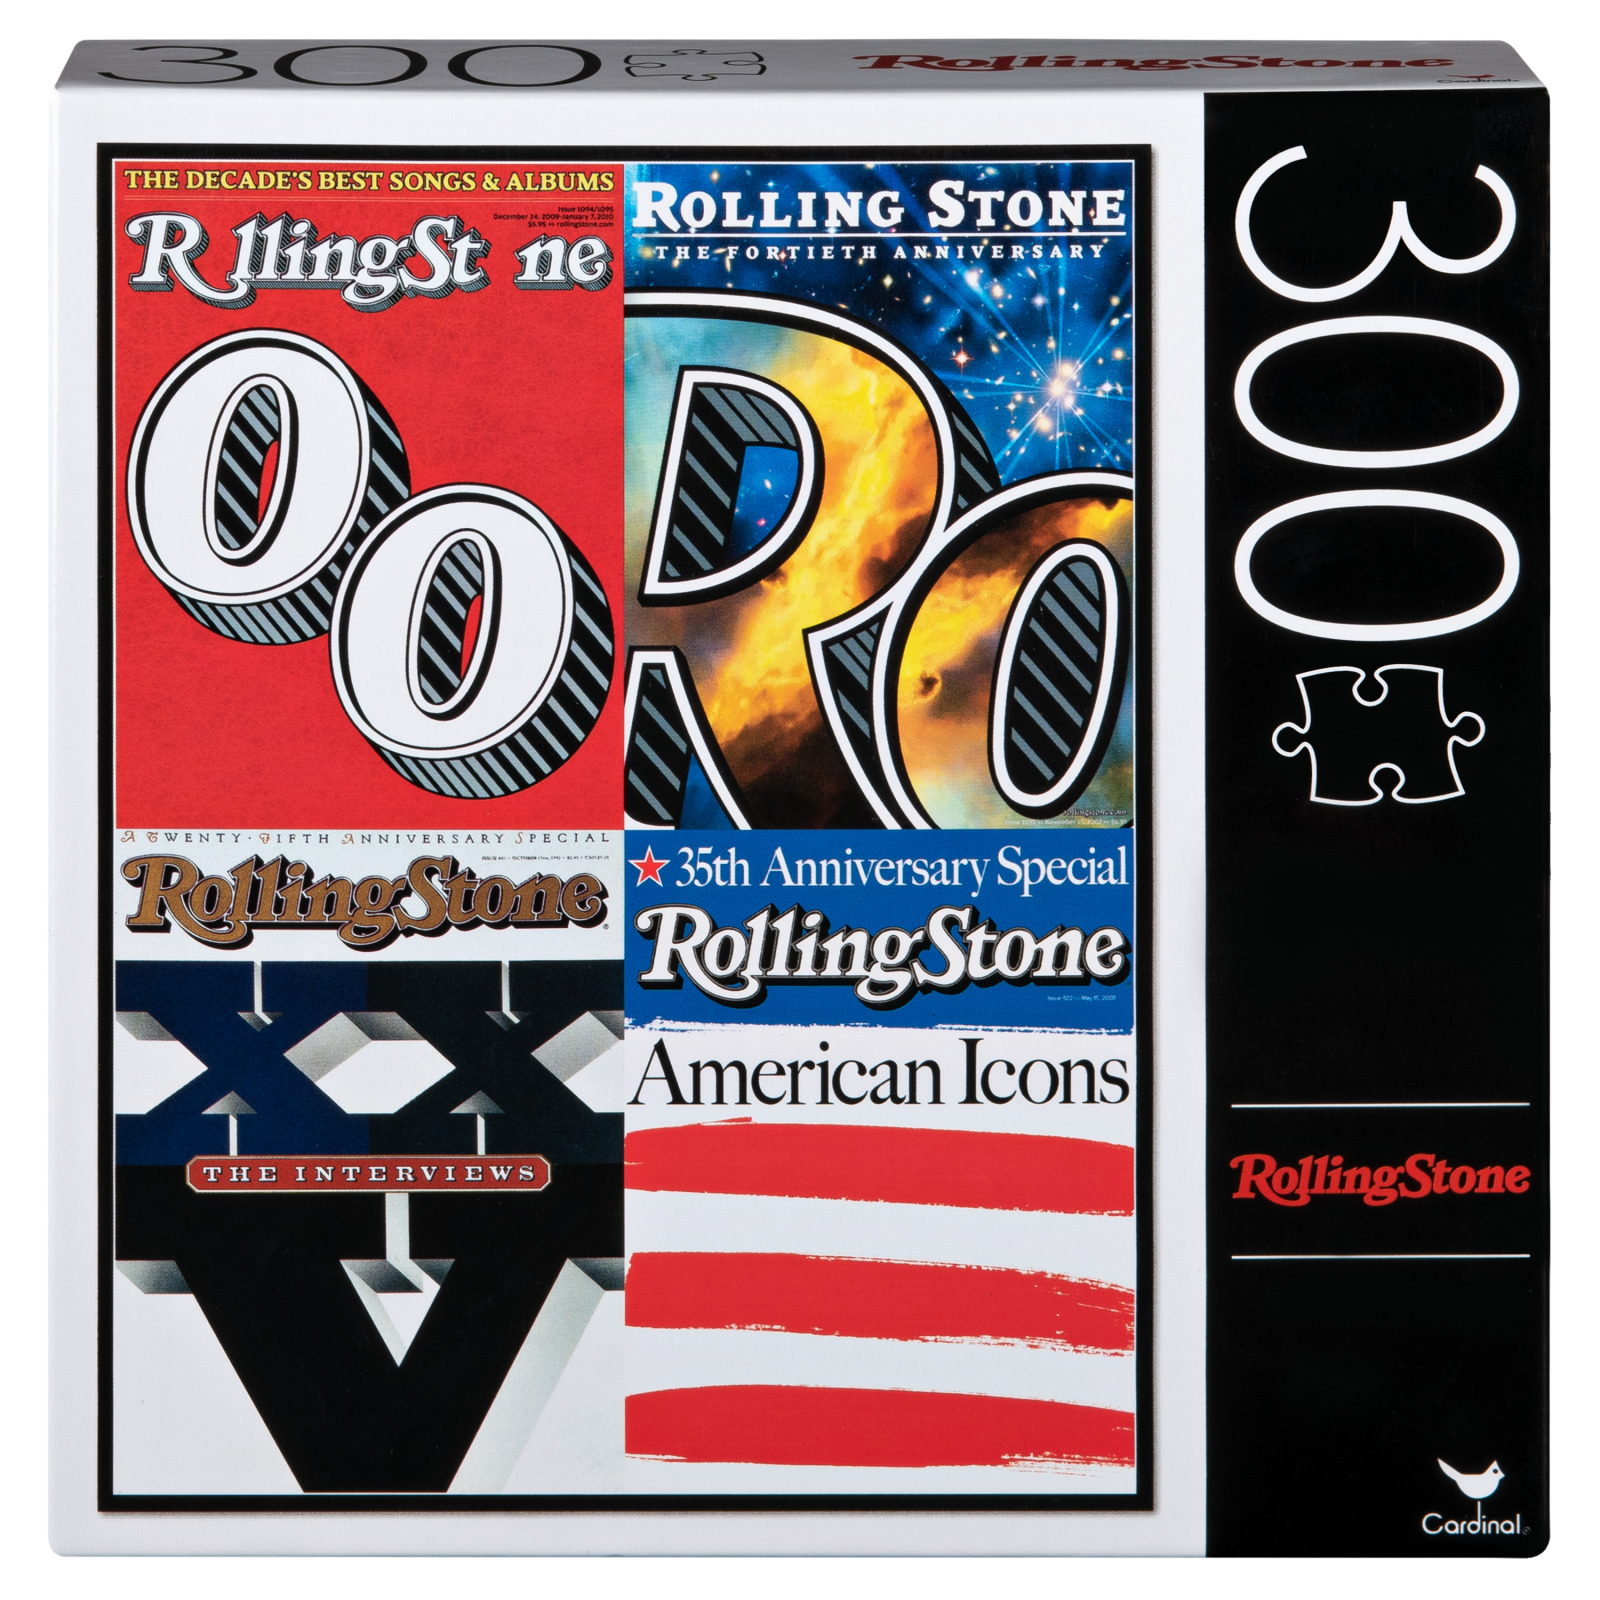 300-Piece Jigsaw Puzzle, Rolling Stone Magazine Covers - image 1 of 2